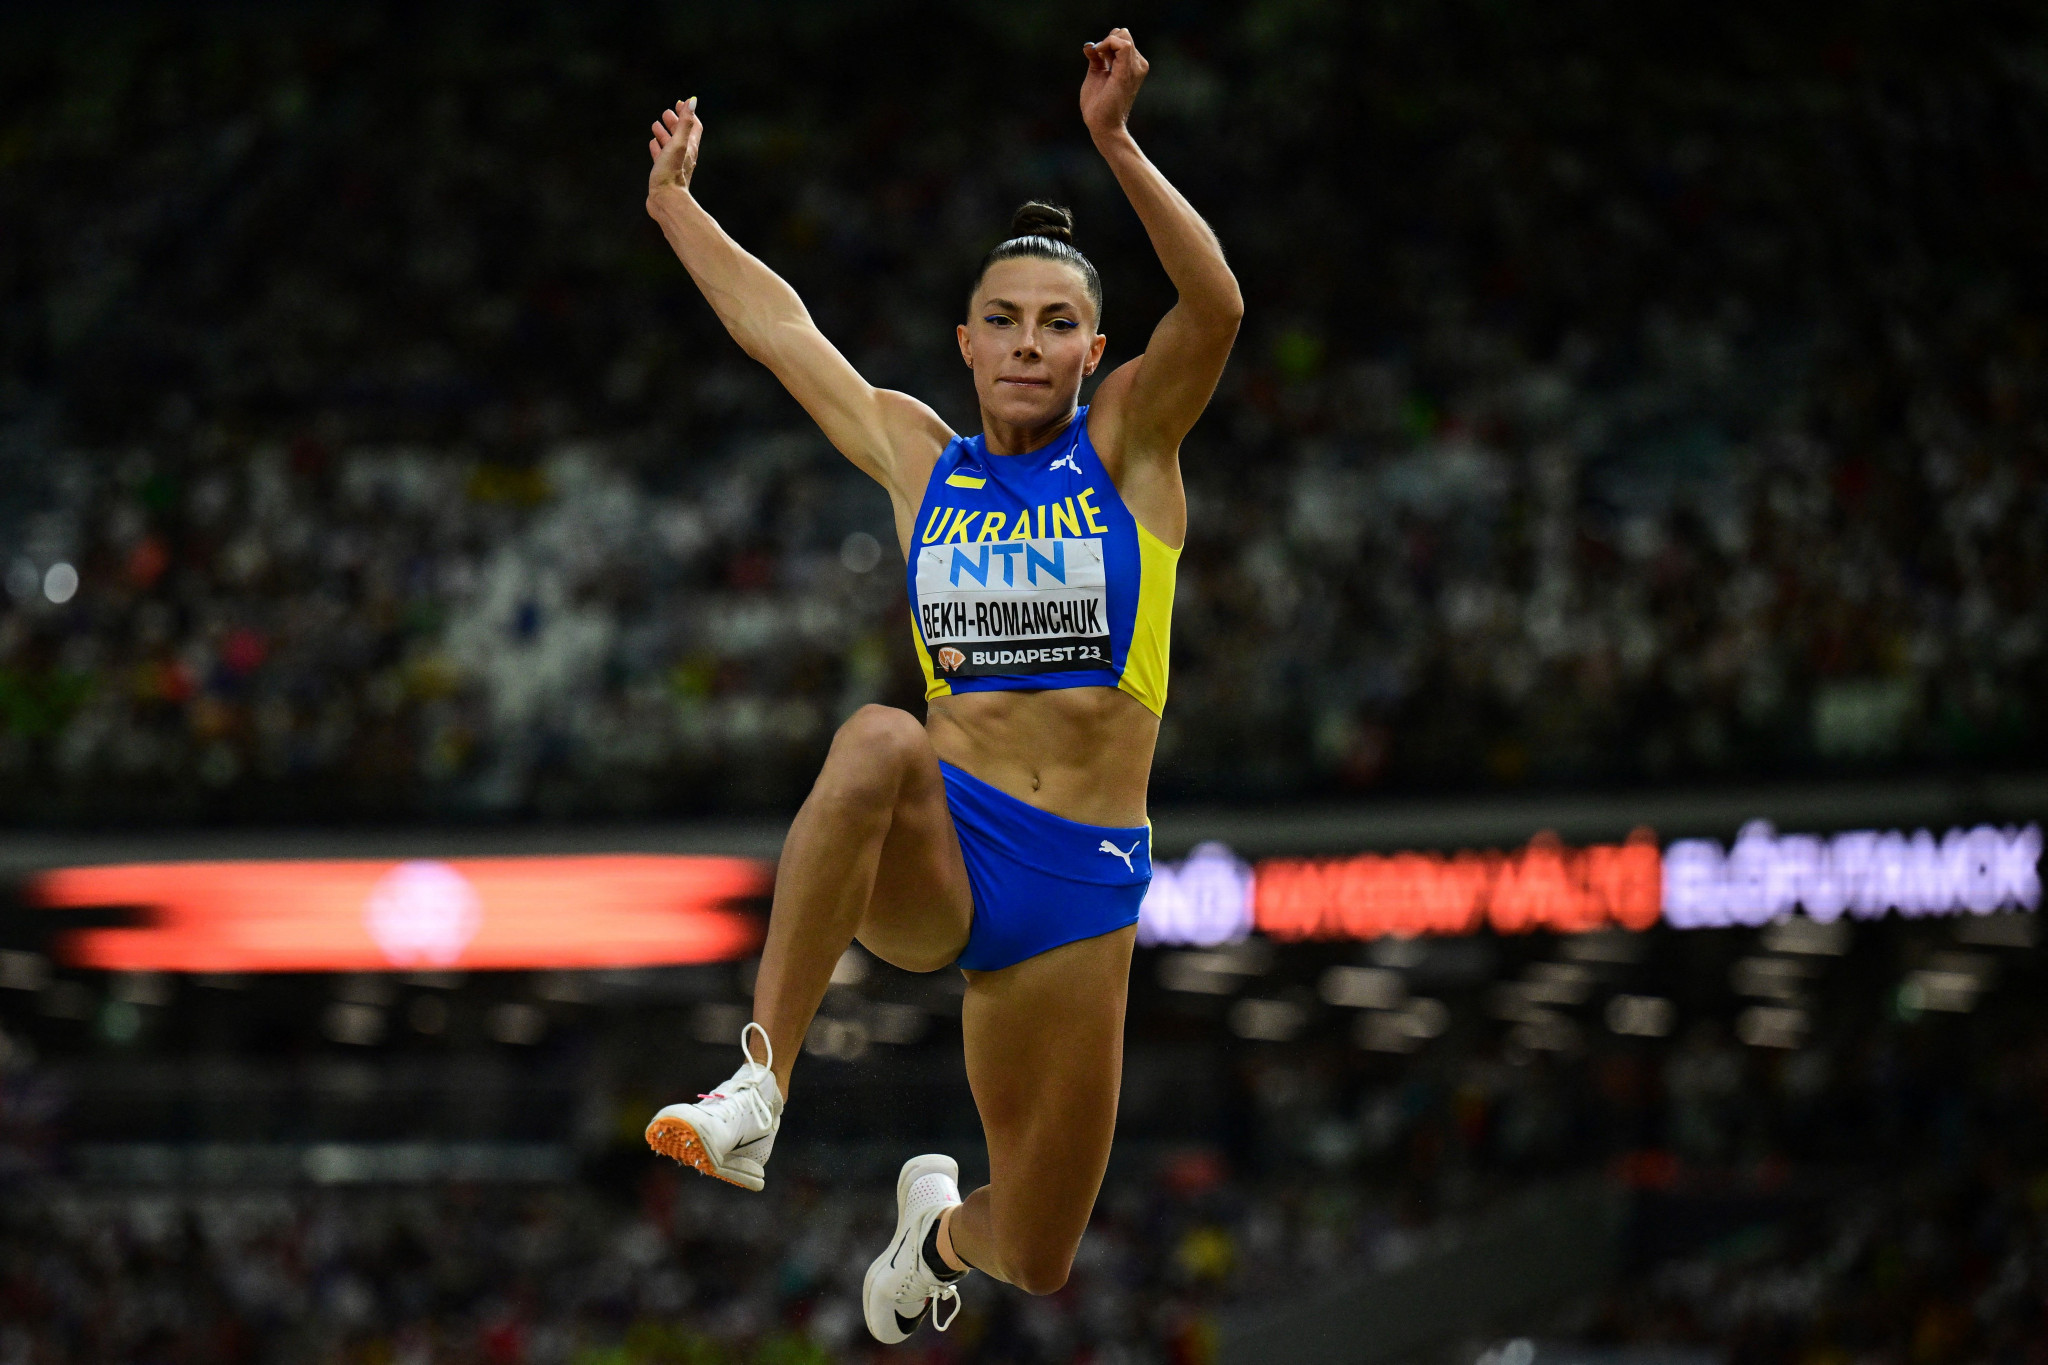 Rojas claims fourth straight world triple jump title with last